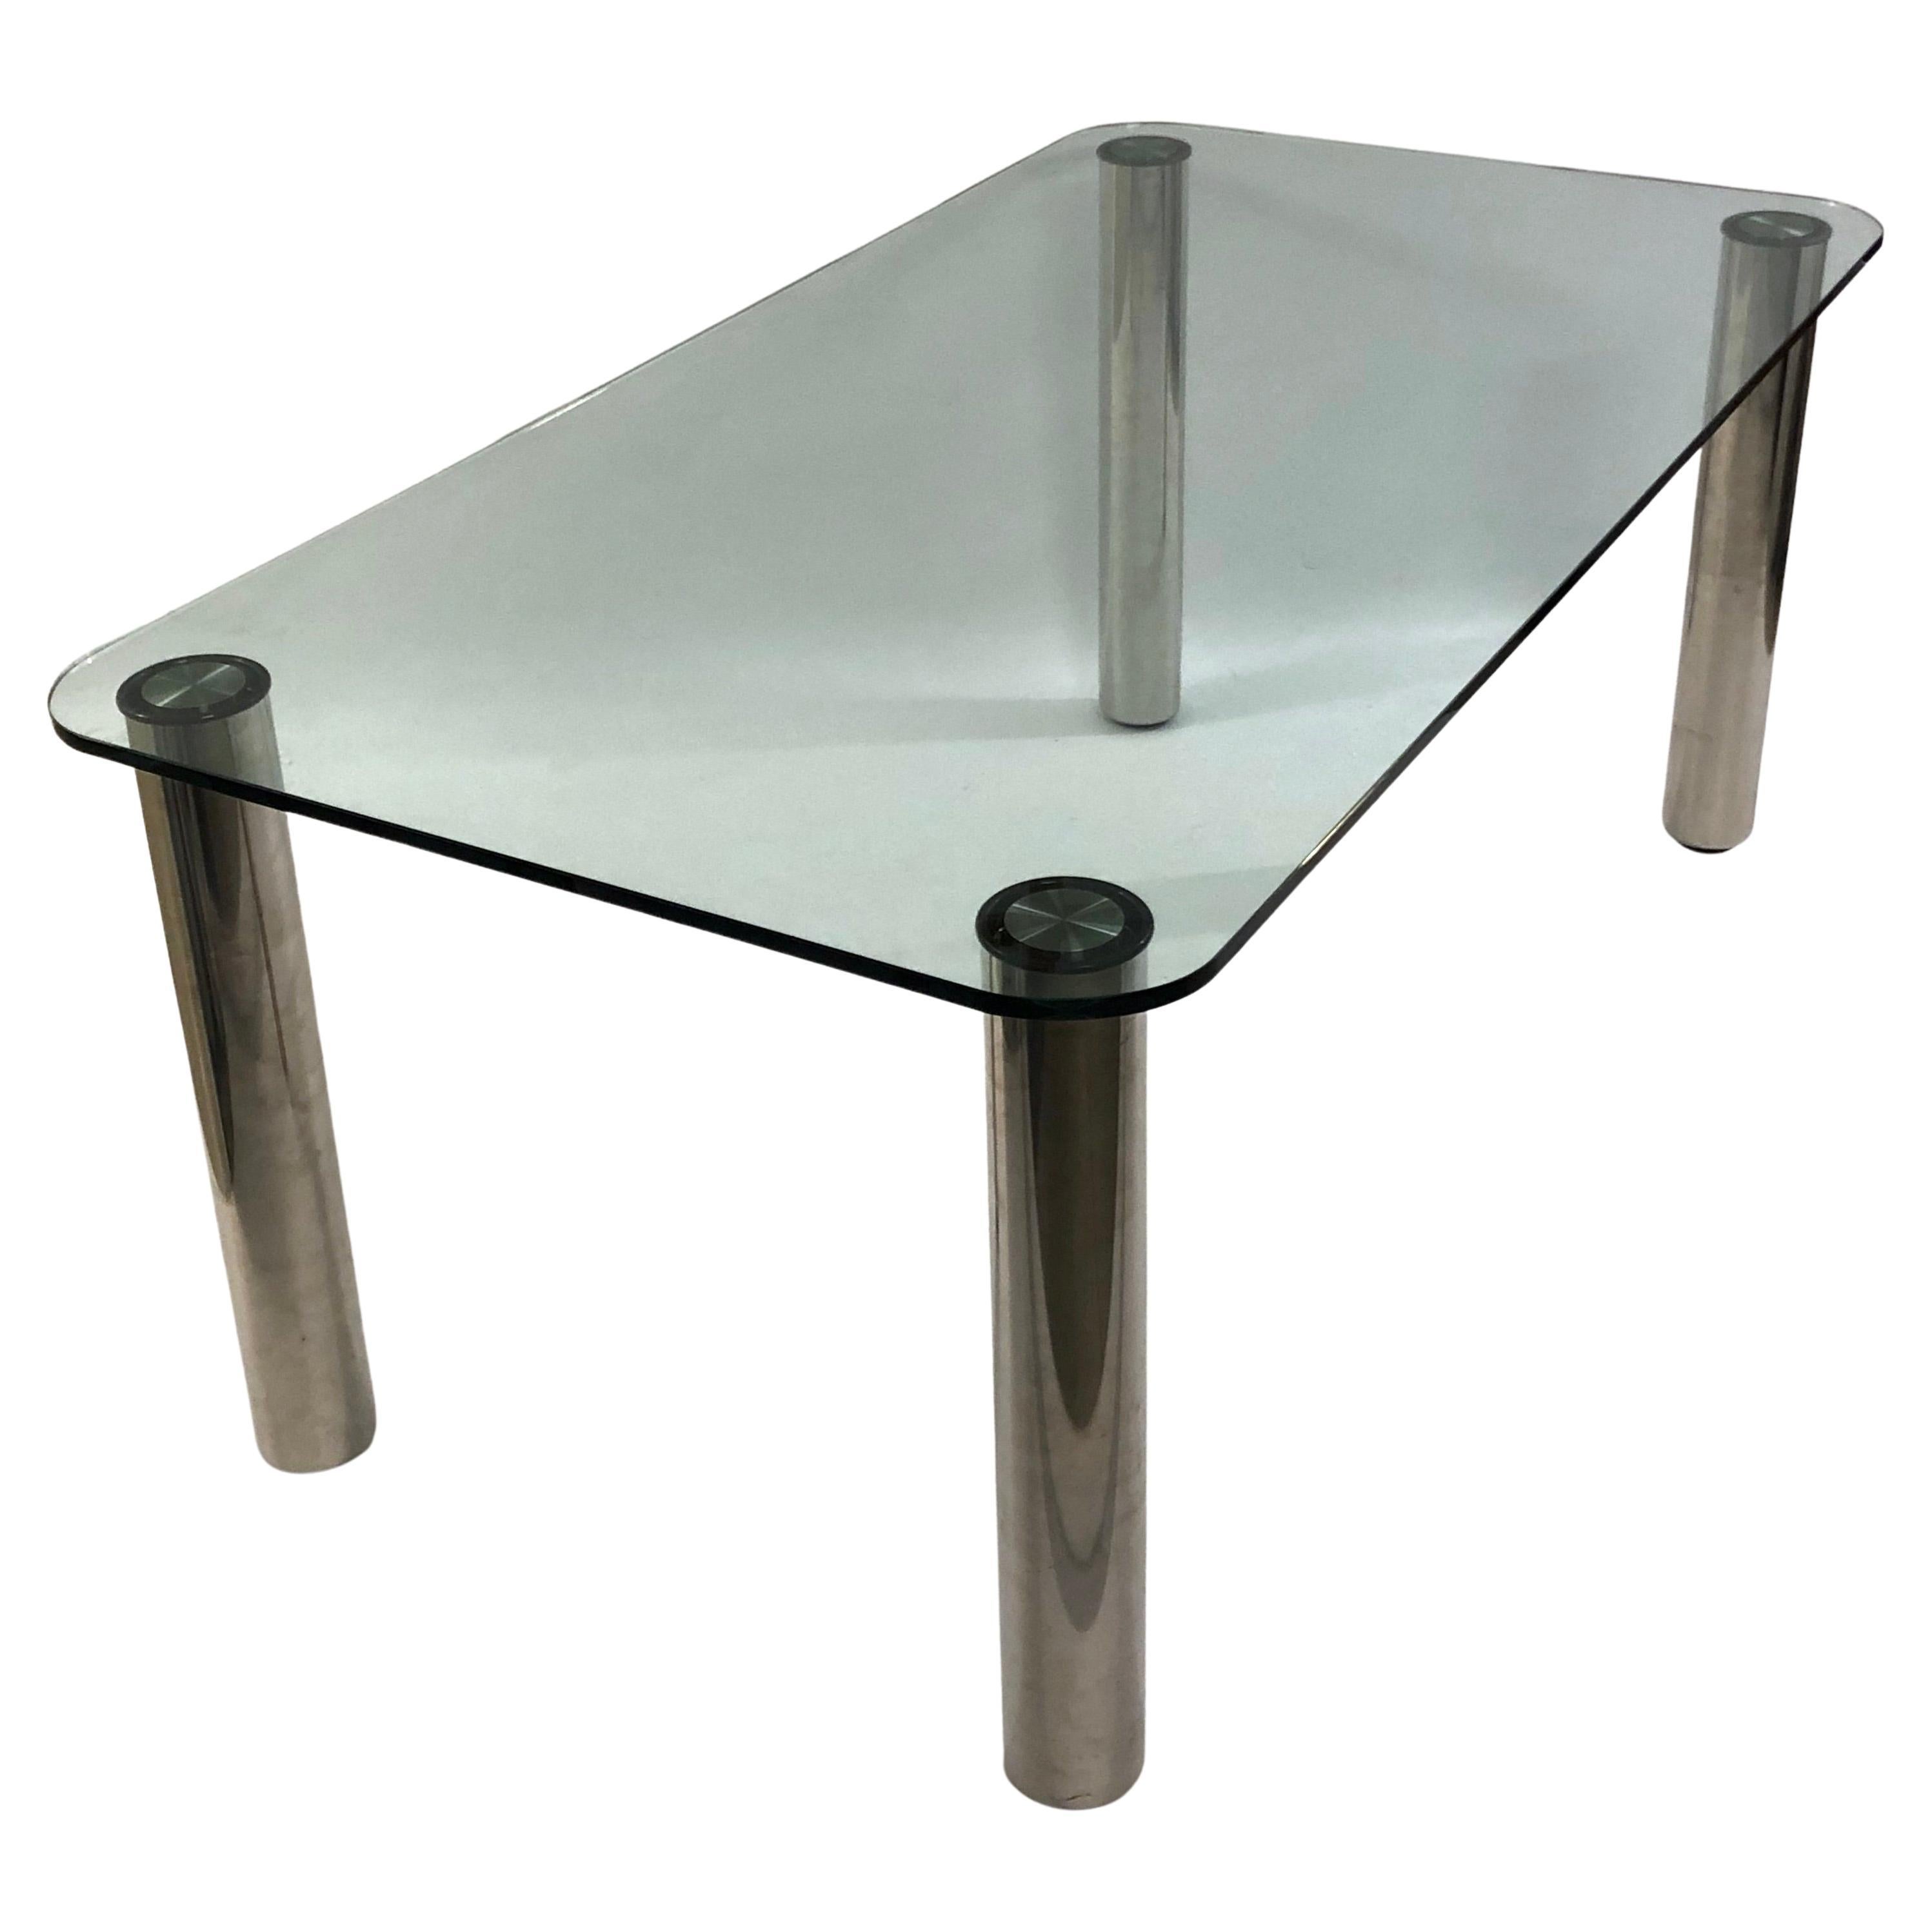 20th Century Glass Dining Table Designed 1970s By Marco Zanuso For Zanotta